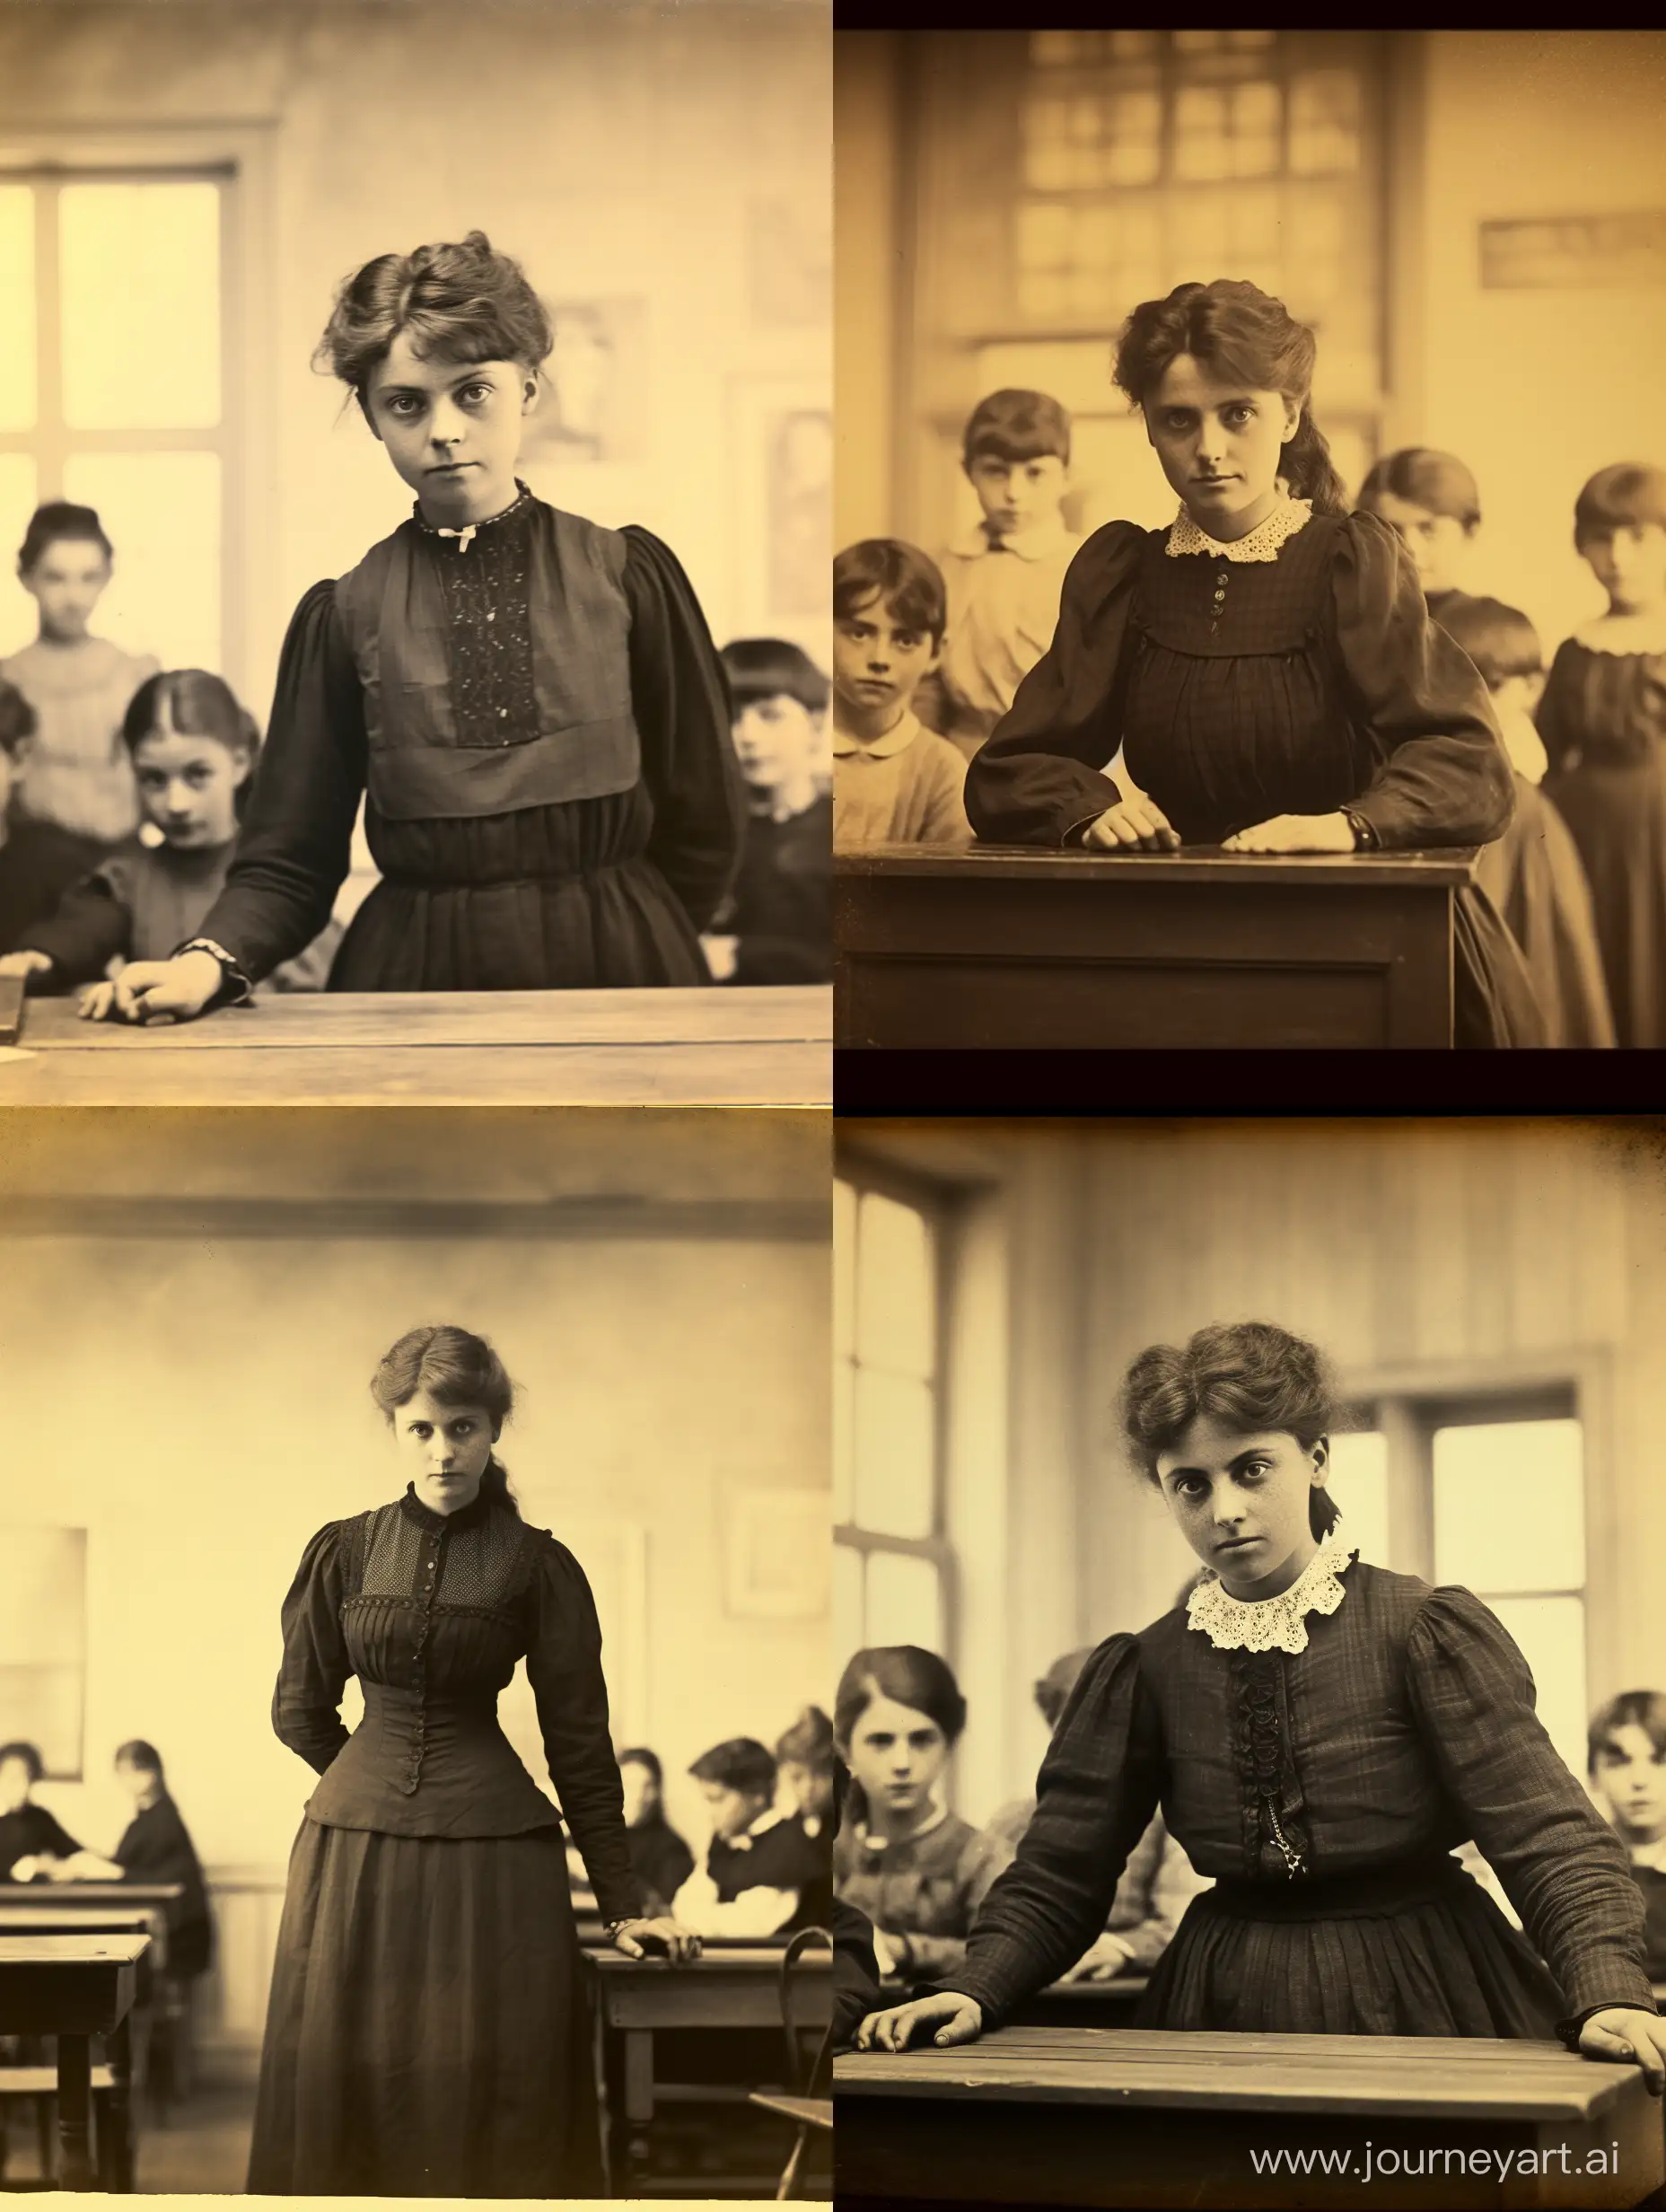 real photo of a pensive Celtic Irish woman working as a teacher in an orphanage with naturally green eyes modestly dressed 23 years from the 19th century in period costume Pride and Prejudice standing in front of the classroom and boys sitting in the desks, the full figure of the woman in the photo, an ordinary girl with a book in hand